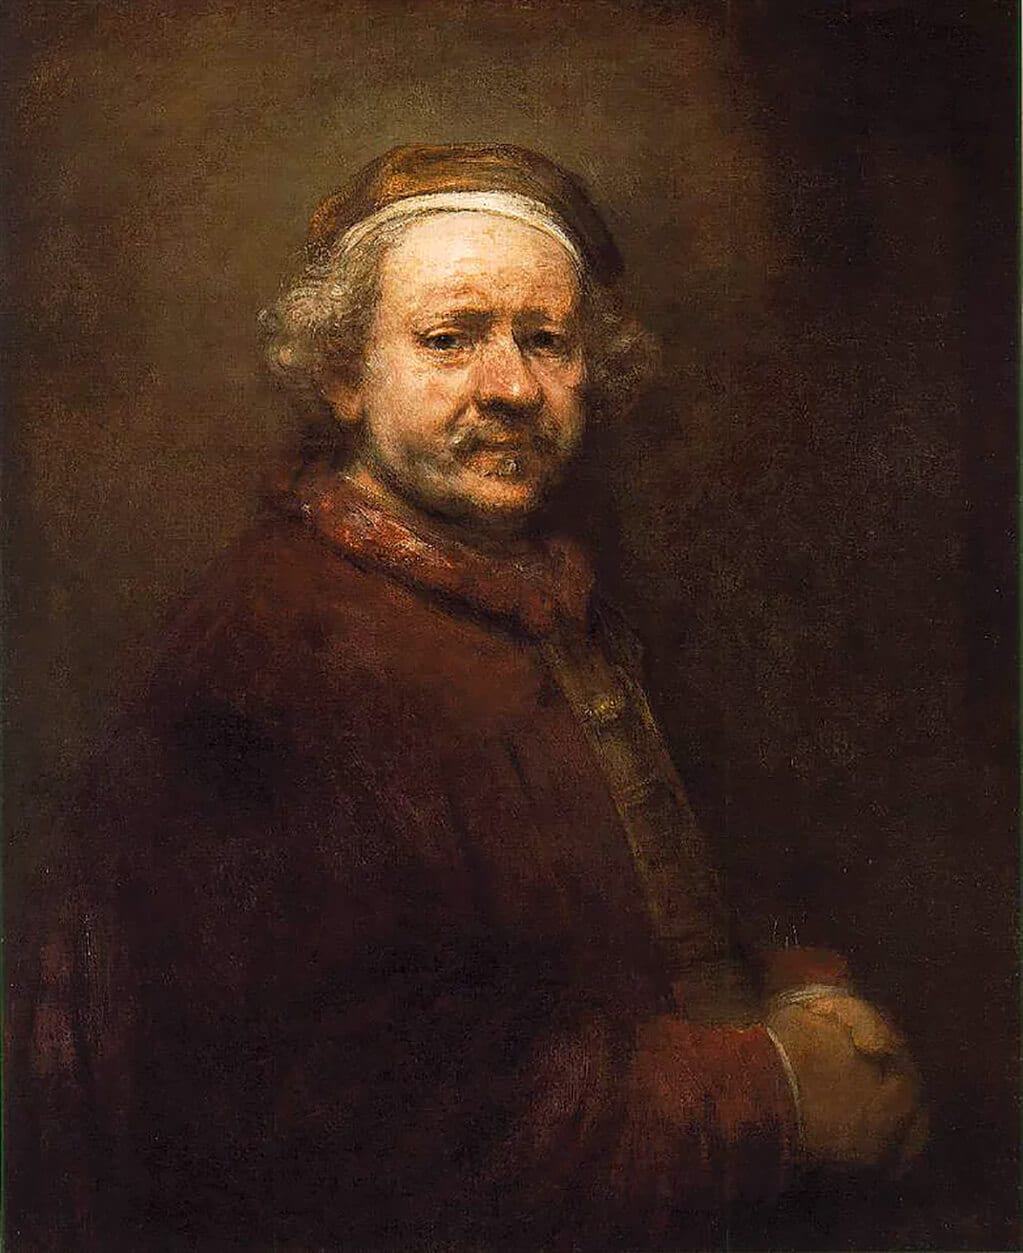 Self-Portrait at the Age of 63, Rembrandt (1669); National Gallery, London